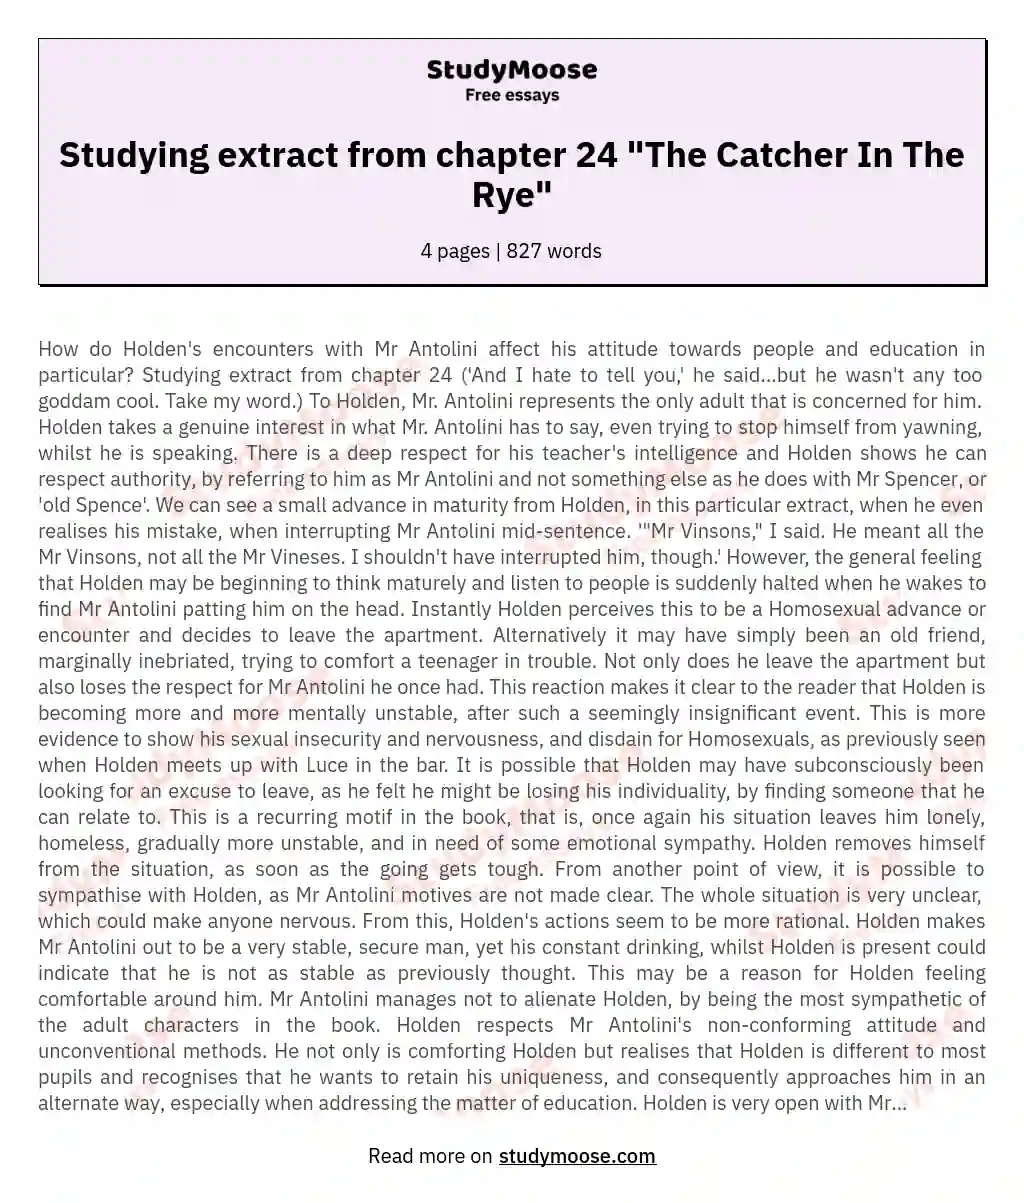 Studying extract from chapter 24 "The Catcher In The Rye" essay